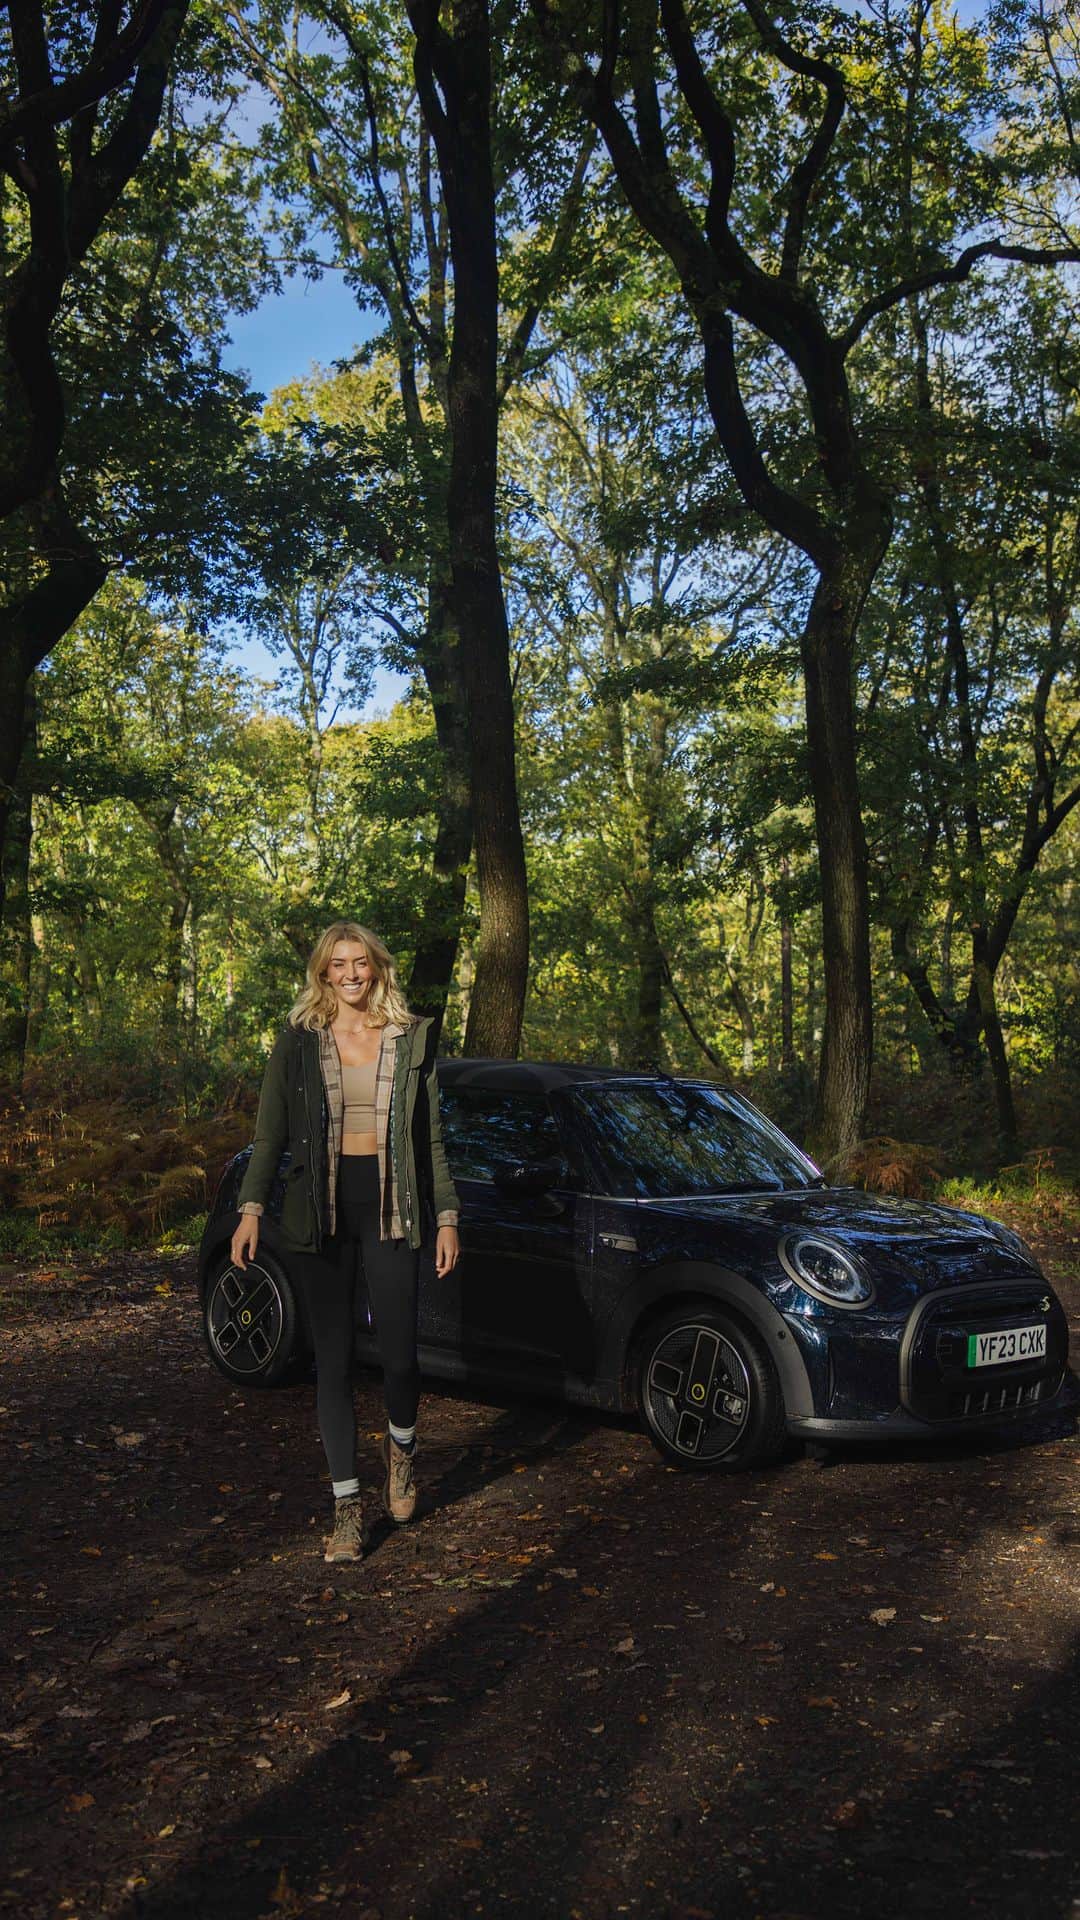 Zanna Van Dijkのインスタグラム：「The ultimate day trip from London 🚗 ad   I’ve been driving the @miniuk Electric Convertible for the past week and took it on an epic adventure! Hit SAVE so you can follow this itinerary:  🏰 Drive to Arundel Castle. Explore the grounds, gardens and interiors. It’s one of my favourite castles in the UK!  ☕️ Wander through Arundel town, see the cathedral, browse the antique shops & grab lunch at a local cafe.  🌊 Drive to the coast. Head to Worthing (or any of the other nearby seaside towns) for a coastal walk, an ice cream and a swim if you’re feeling brave!   This car is one of only 150 electric convertible MINIs in the UK and is SUCH a dream to drive! It’s smooth, comfortable and most of all - fun! Plus is has all the bells and whistles like heated seats, Apple CarPlay and comfort access. What more could you want!? ♥️」